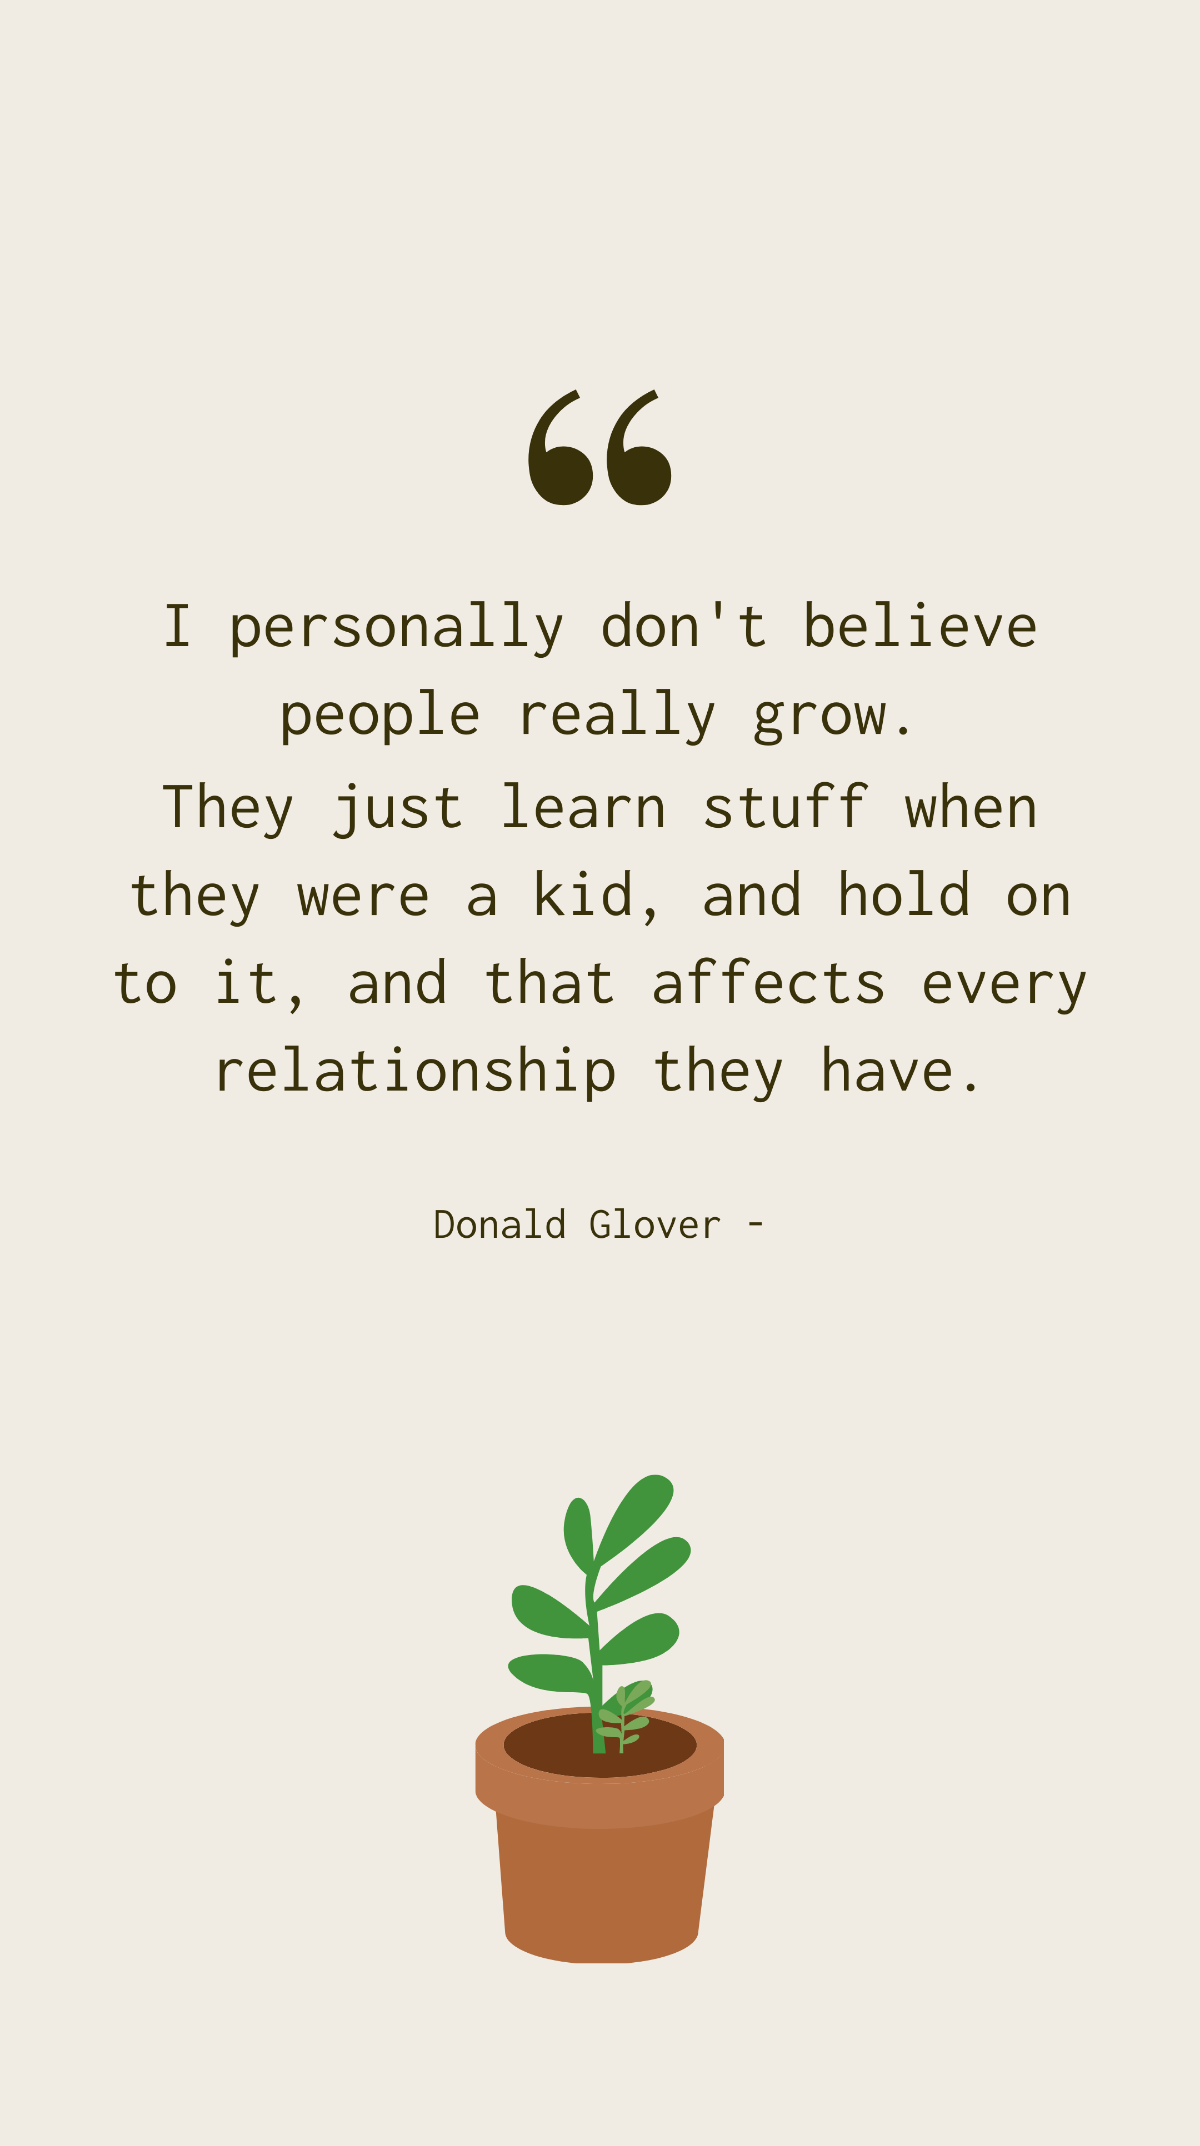 Donald Glover - I personally don't believe people really grow. They just learn stuff when they were a kid, and hold on to it, and that affects every relationship they have. Template